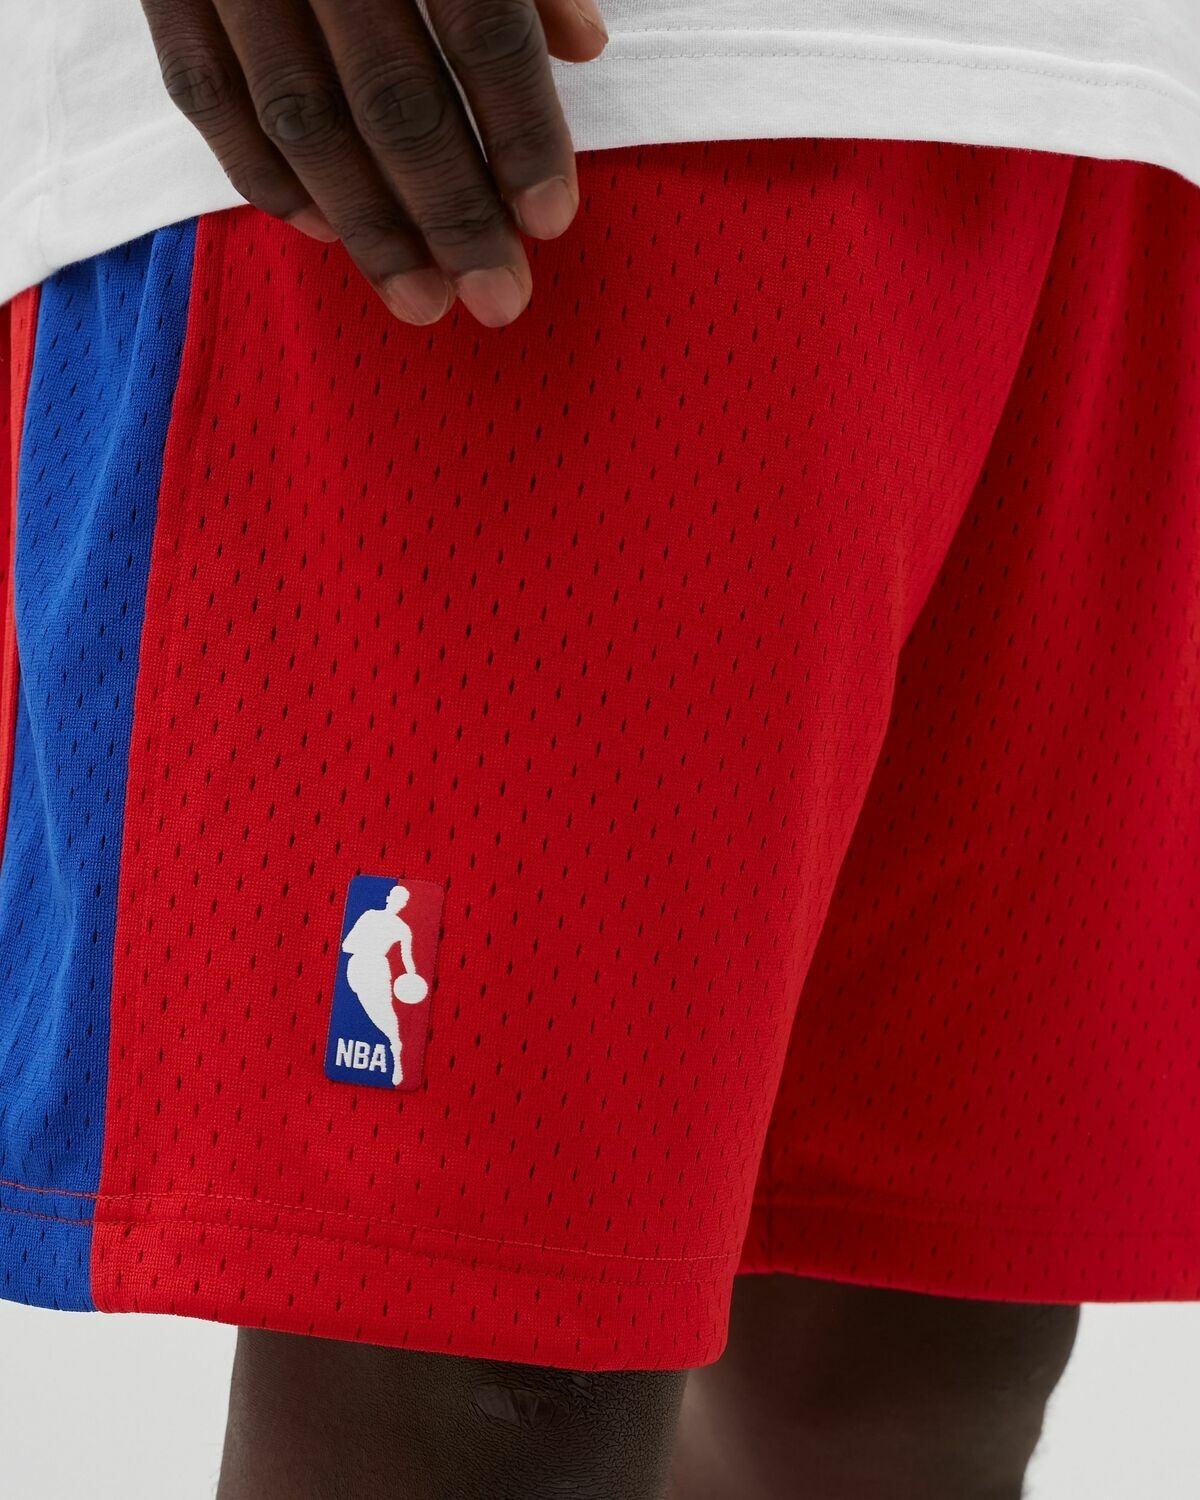 Mitchell & Ness Nba Swingman Shorts Los Angeles Clippers 2000 01 Red - Mens - Sport & Team Shorts